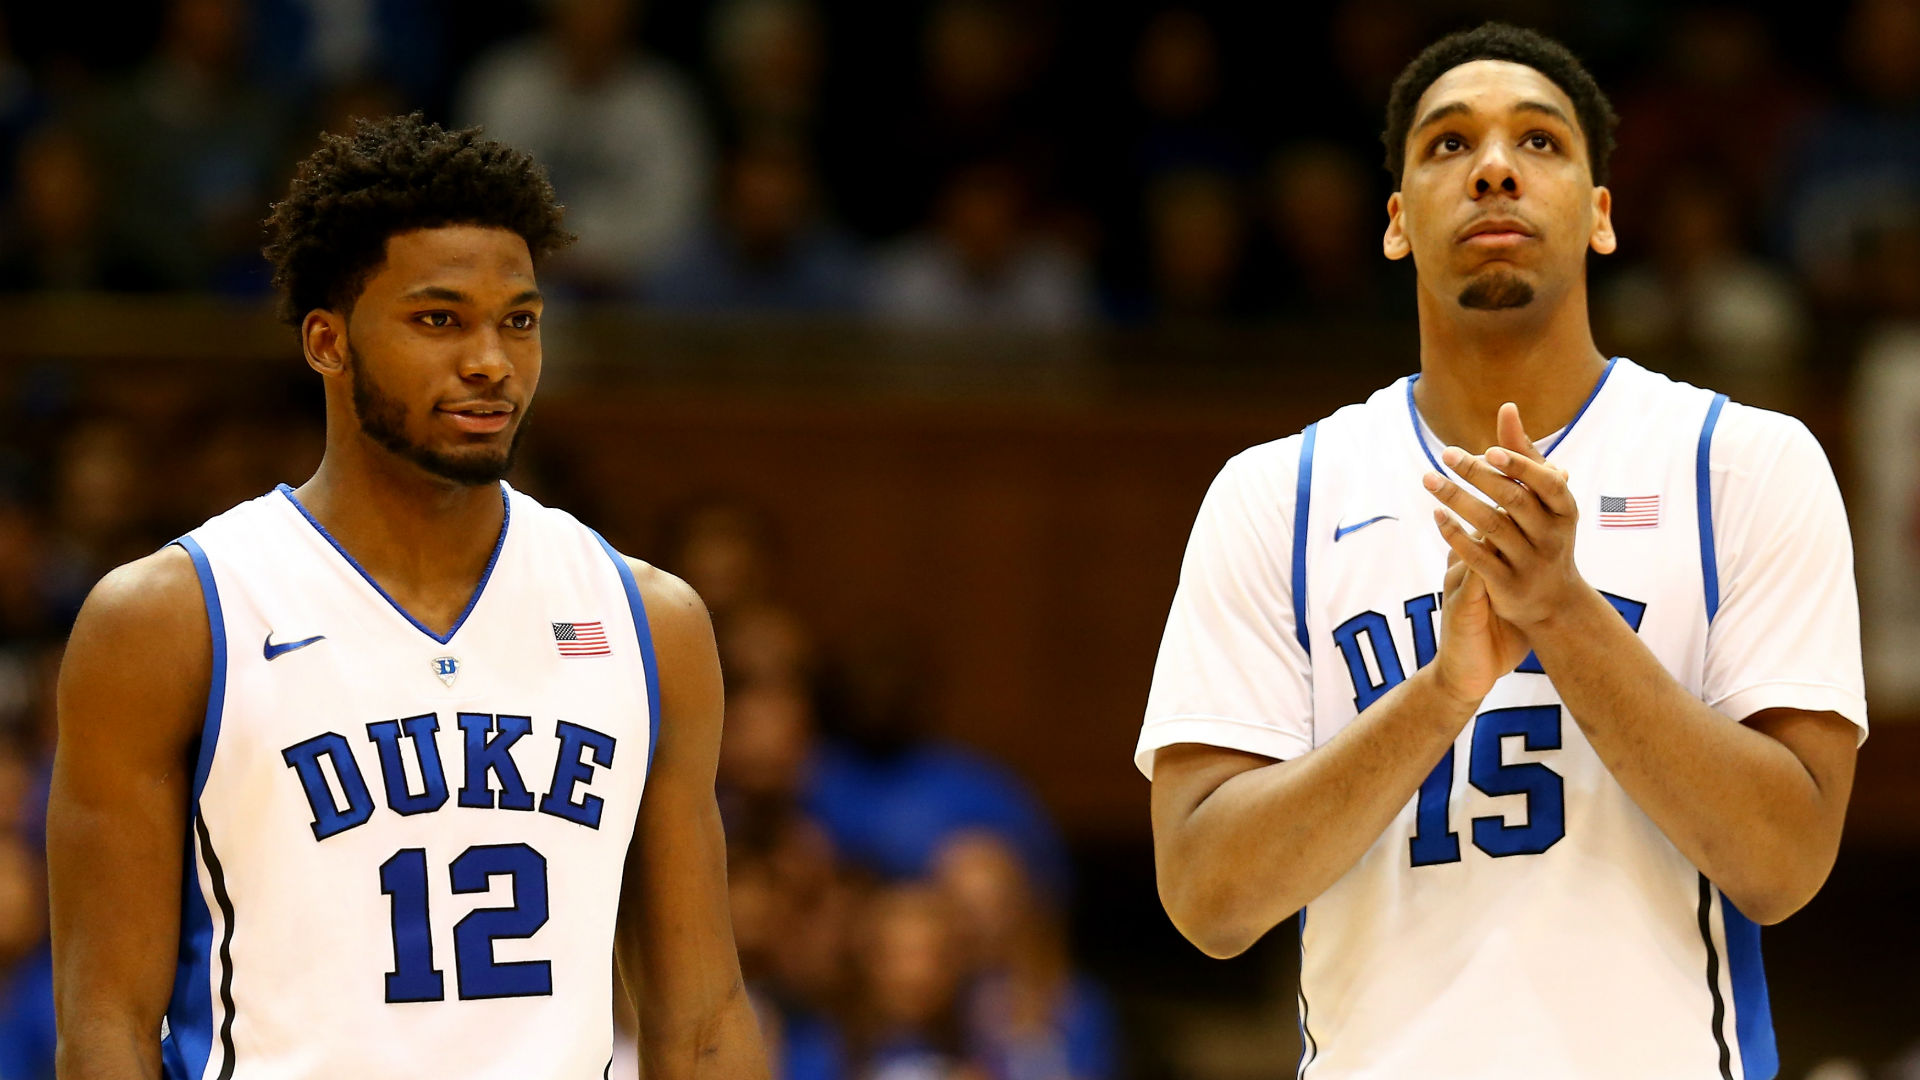 Justise Winslow and Jahlil Okafor have to wonder which way Duke is heading after a tumultuous week (sportingnews.com)